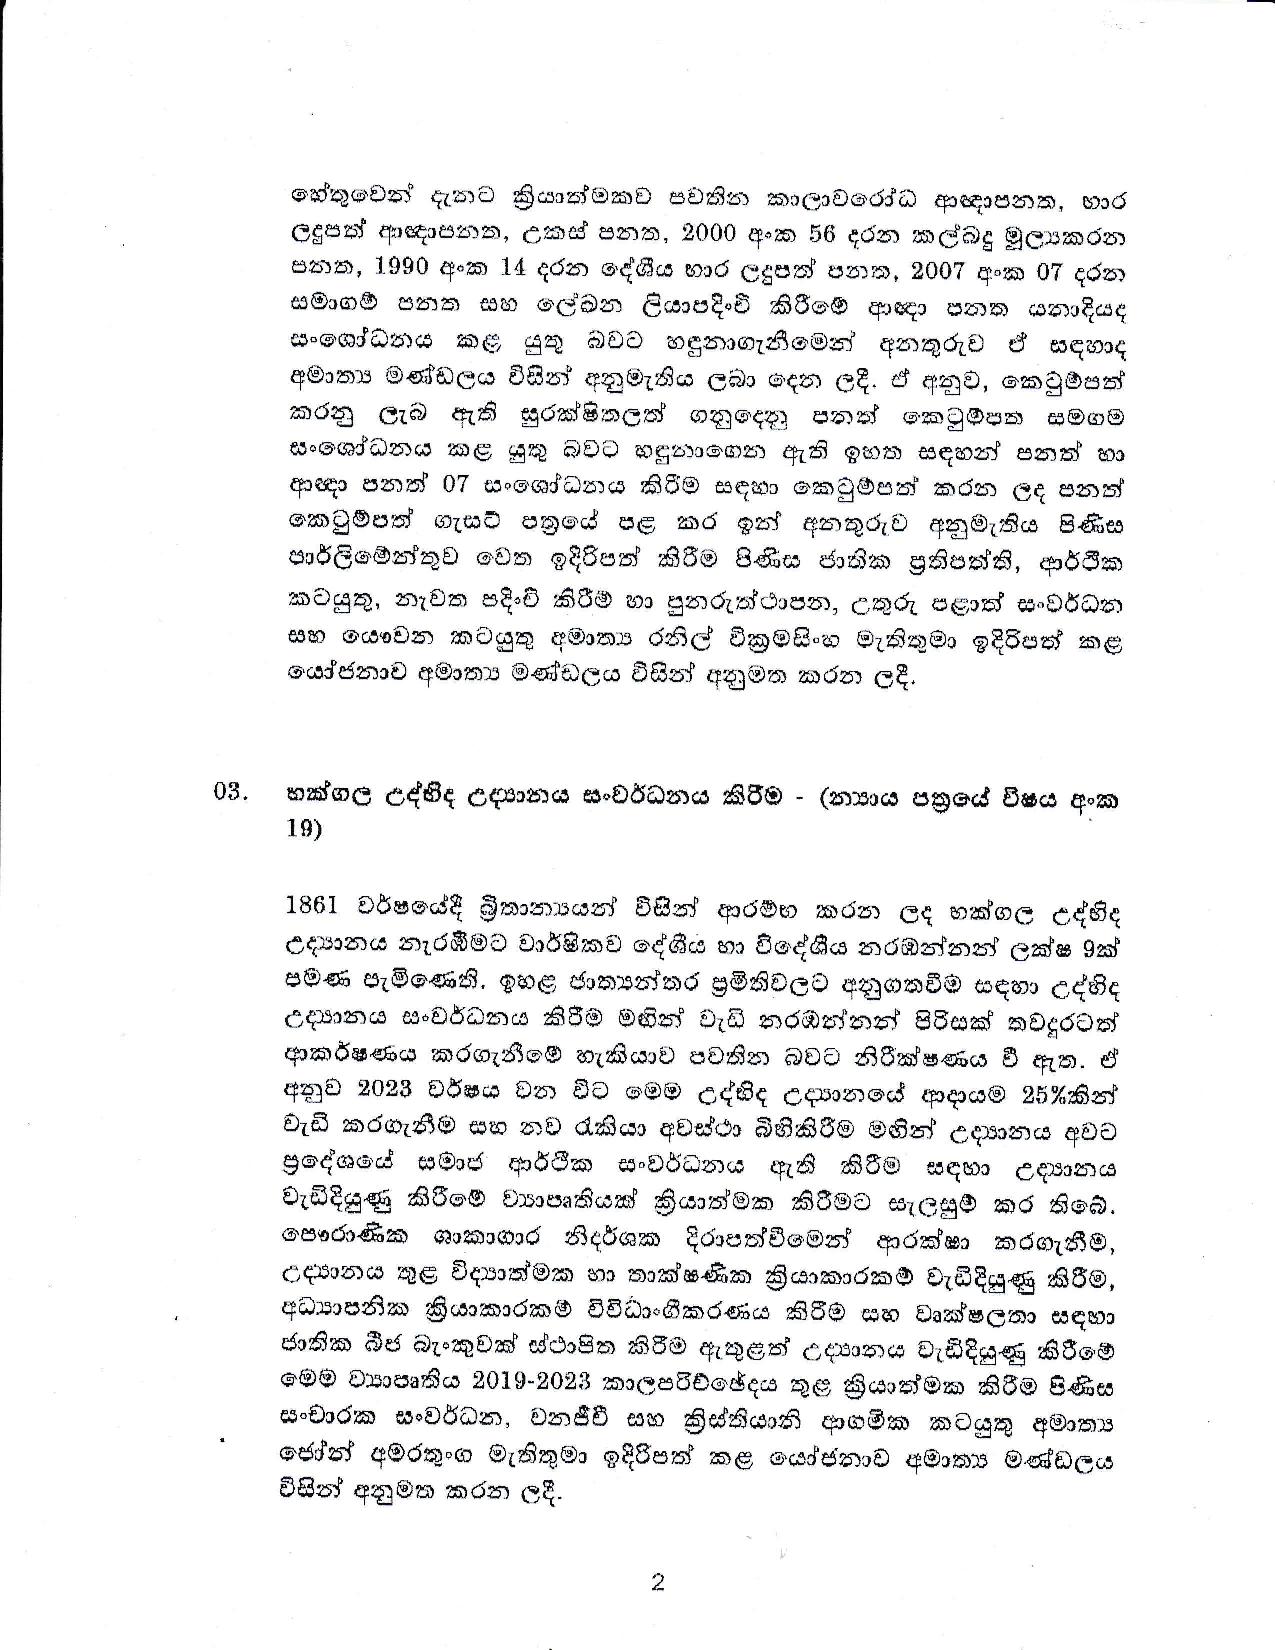 Cabinet Decision on 28.05.2019 page 002